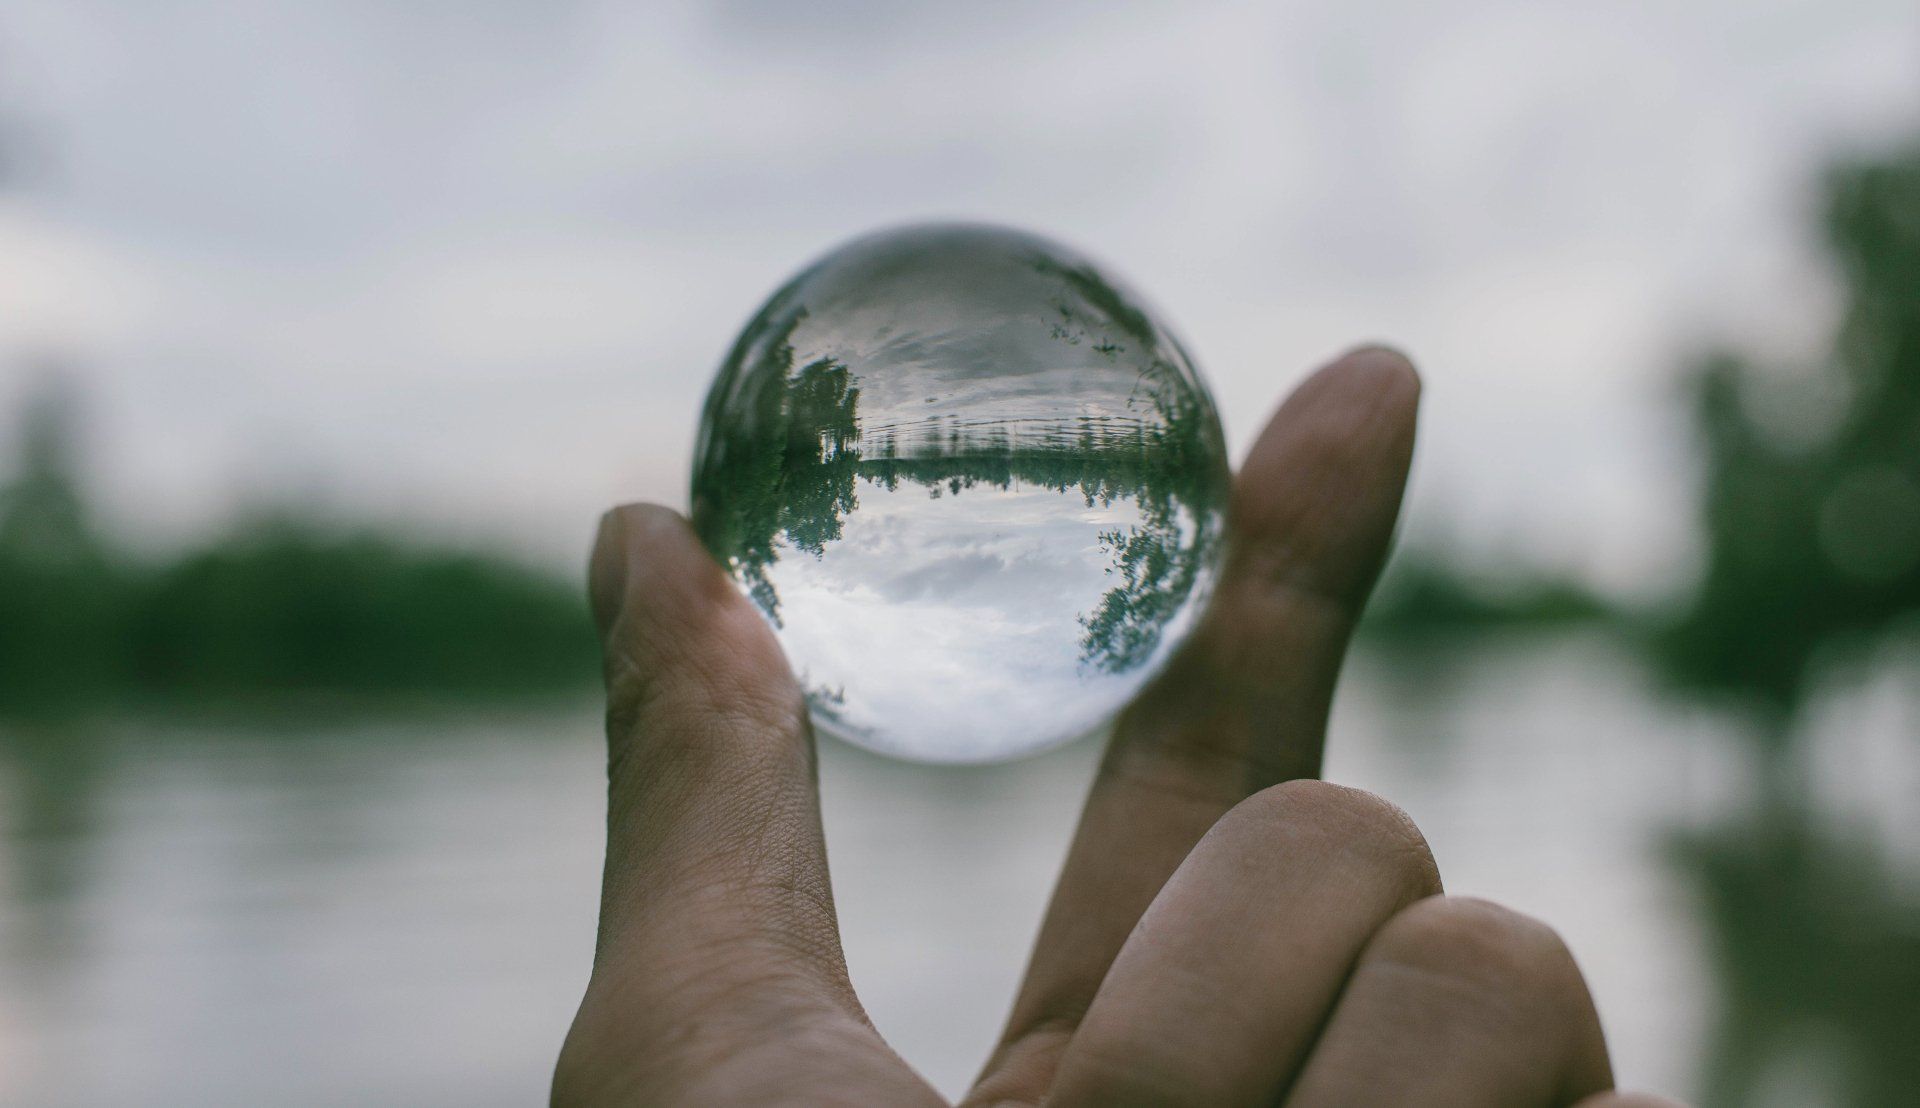 A person is holding a clear glass ball in their hand.